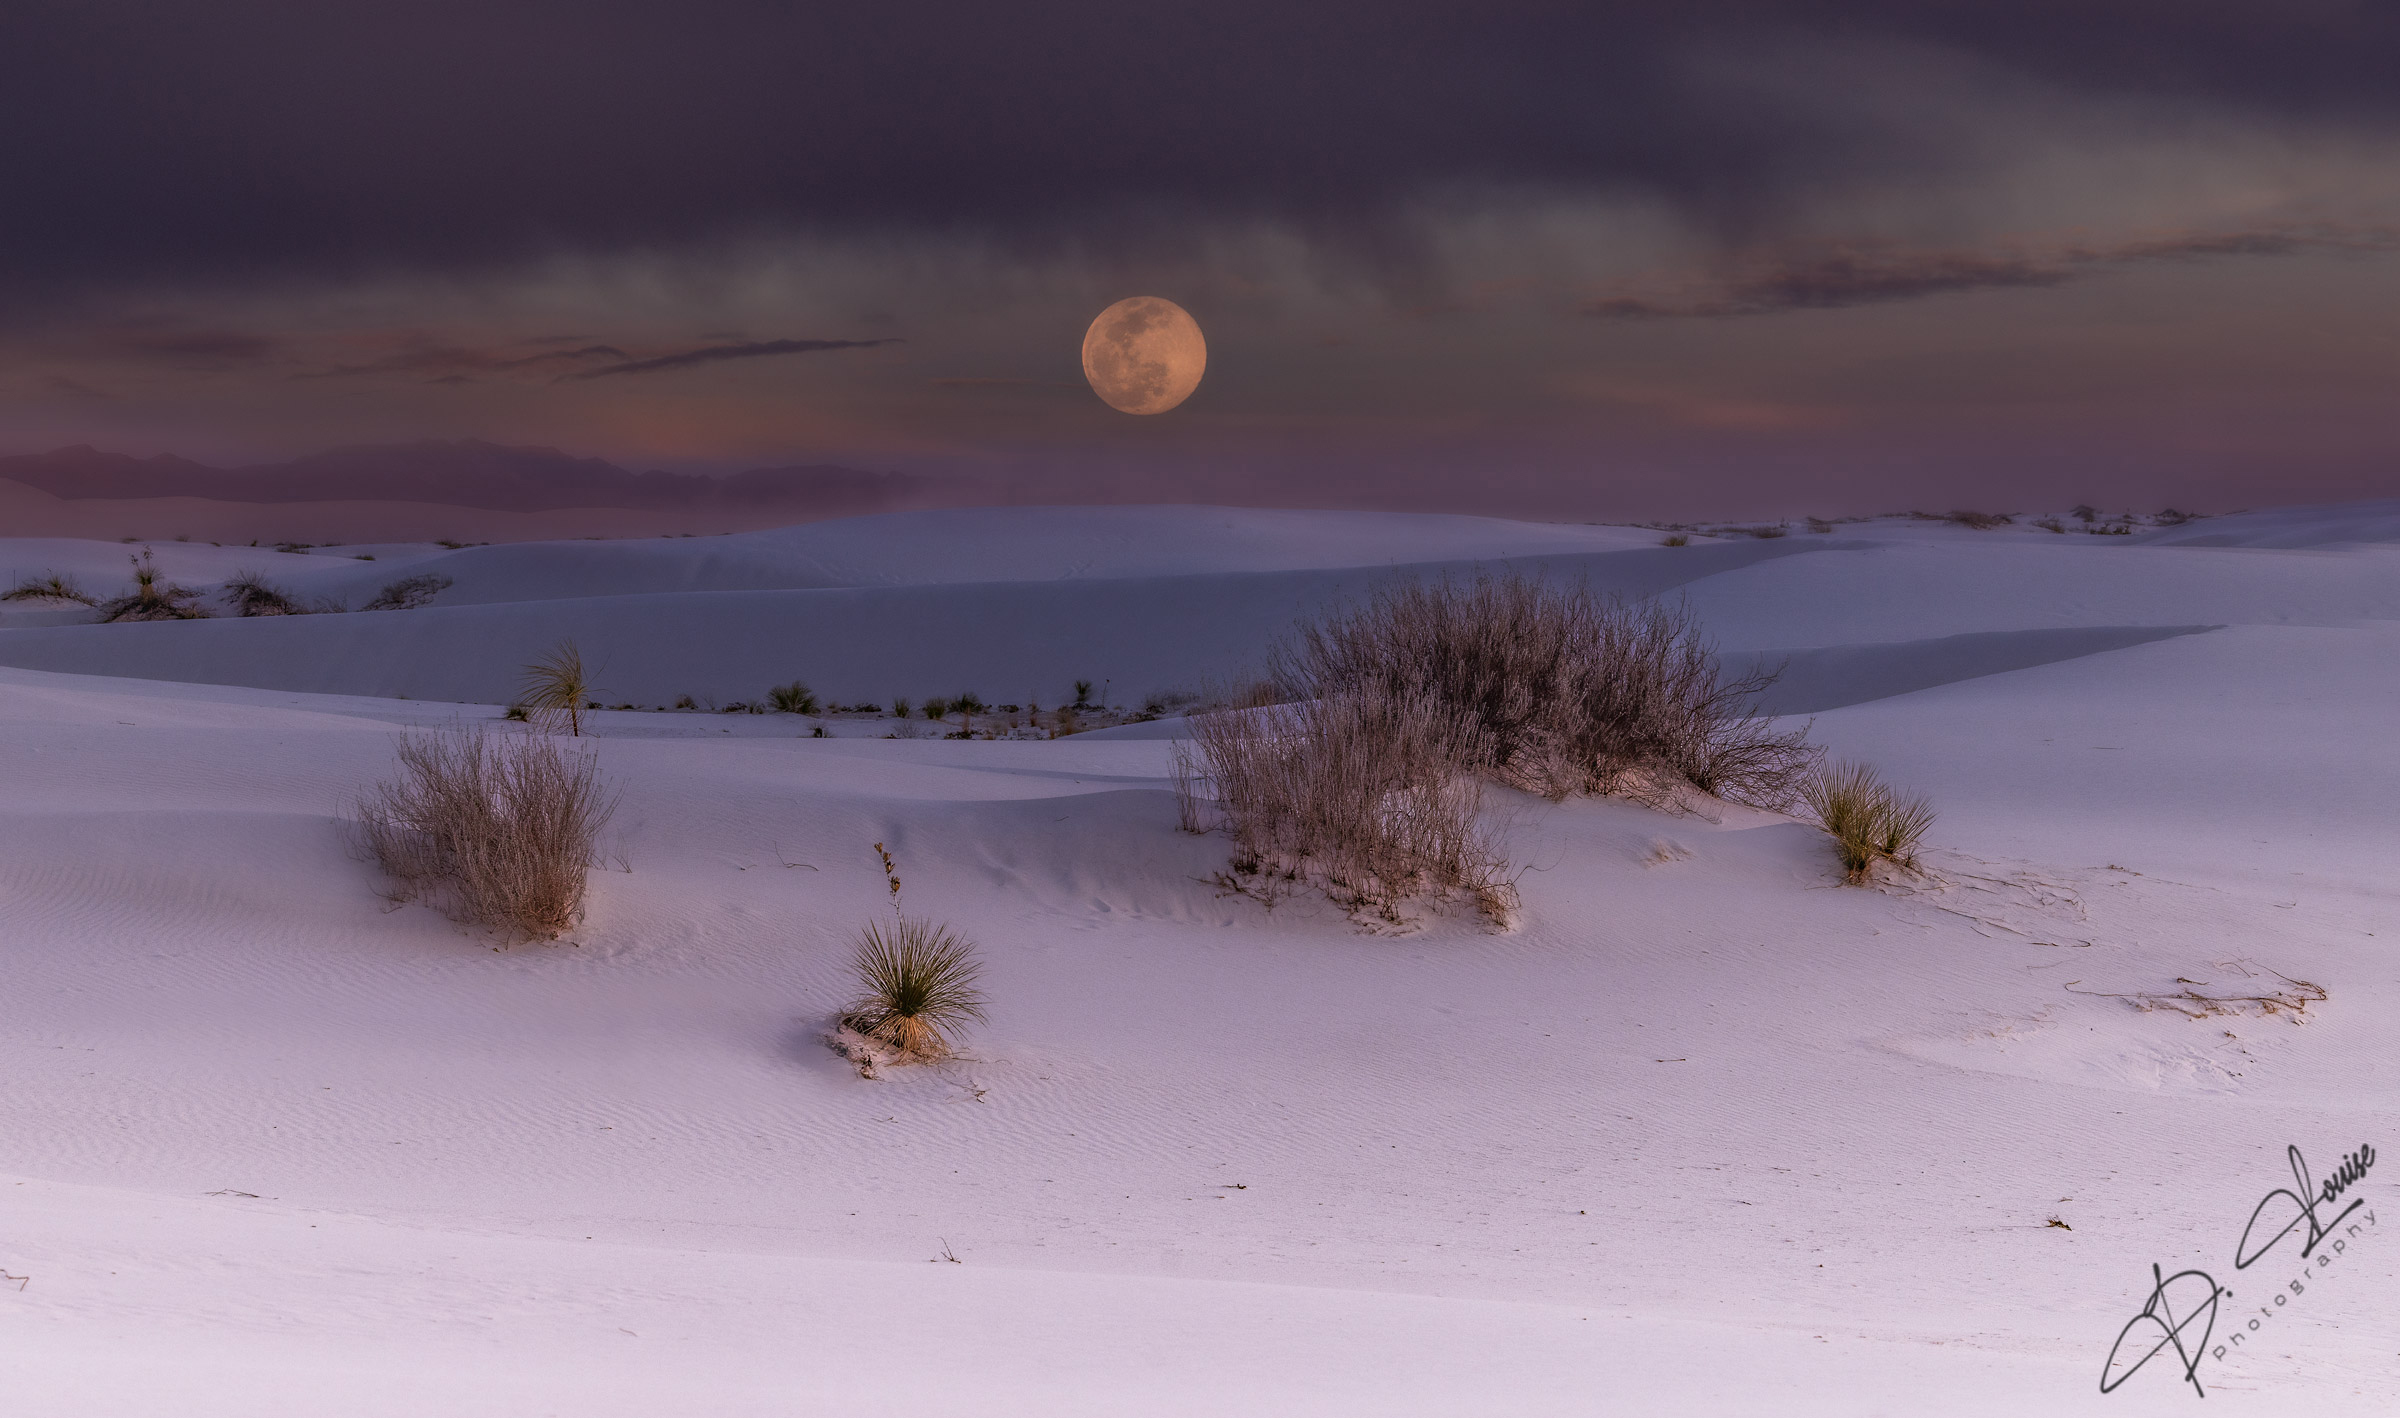 Sunset at White Sands National Park on a full moon night